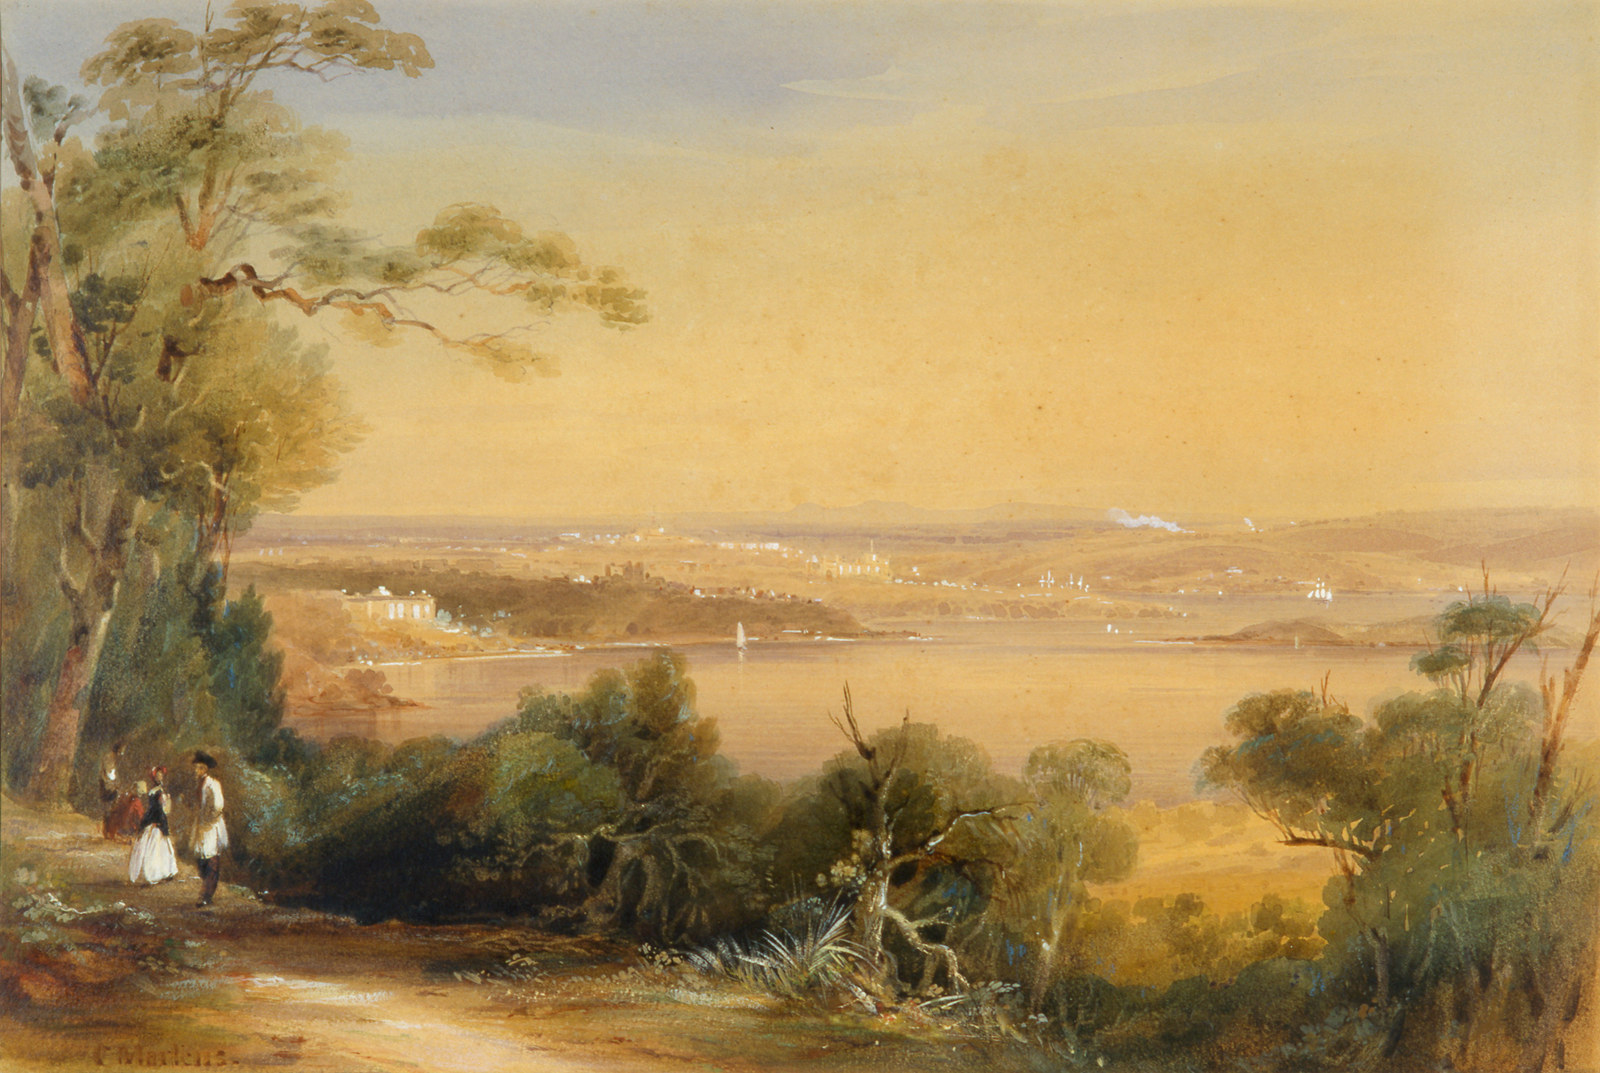 From Darling Point looking towards Elizabeth Bay House and the city, watercolour and gouache on paper, by Conrad Martens, circa 1847